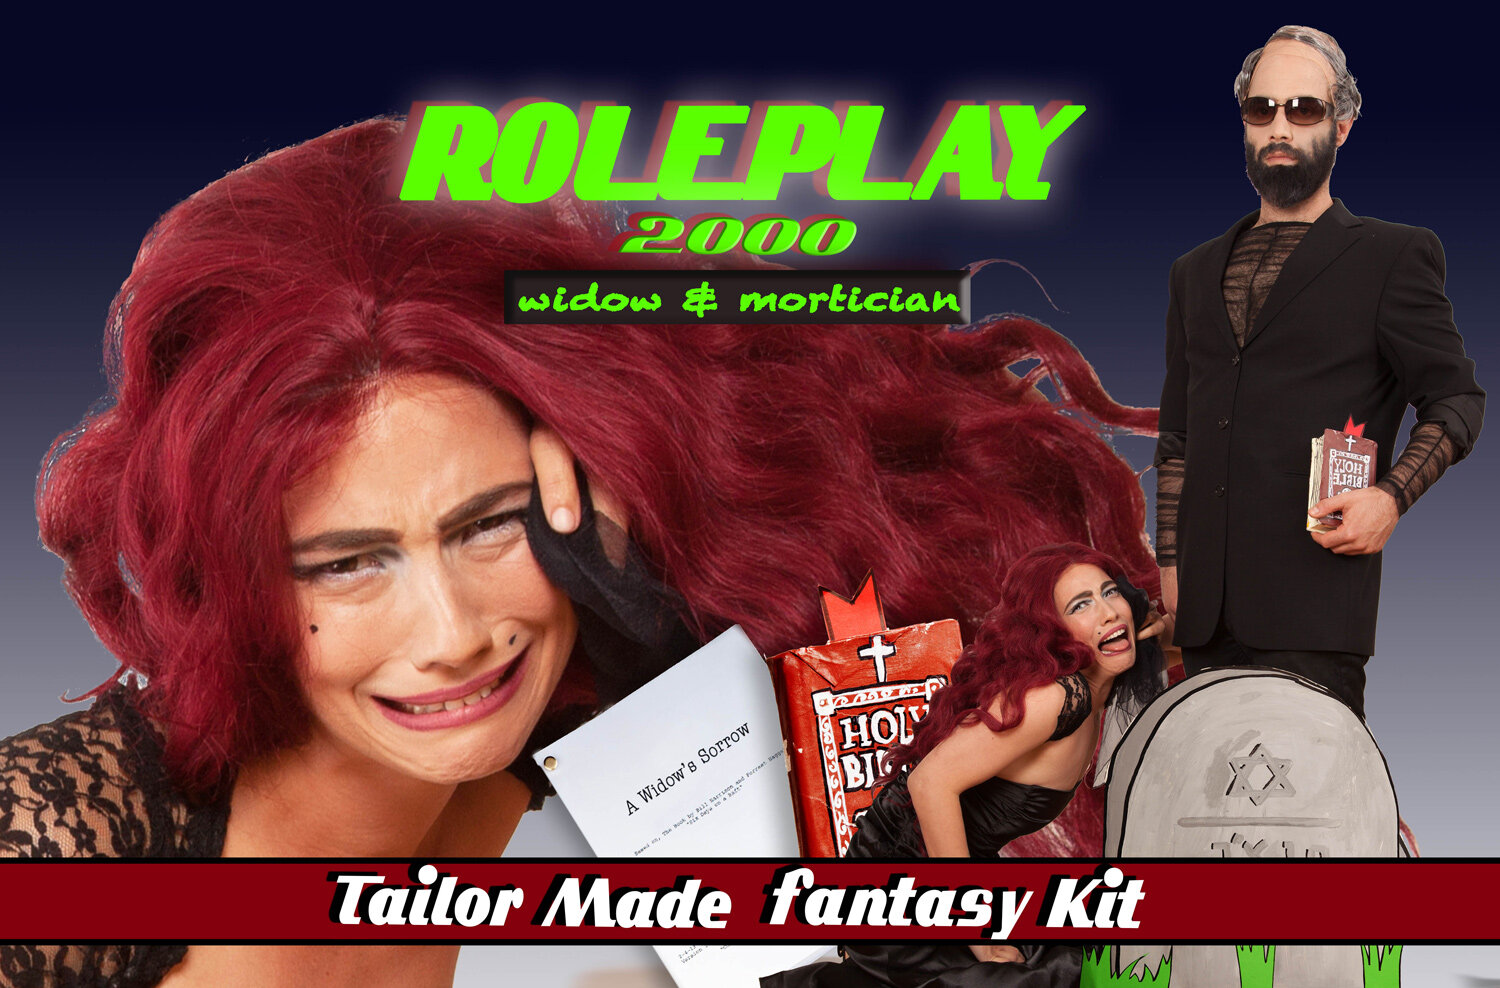 The widow and the mortician | RolePlay 2000 kit